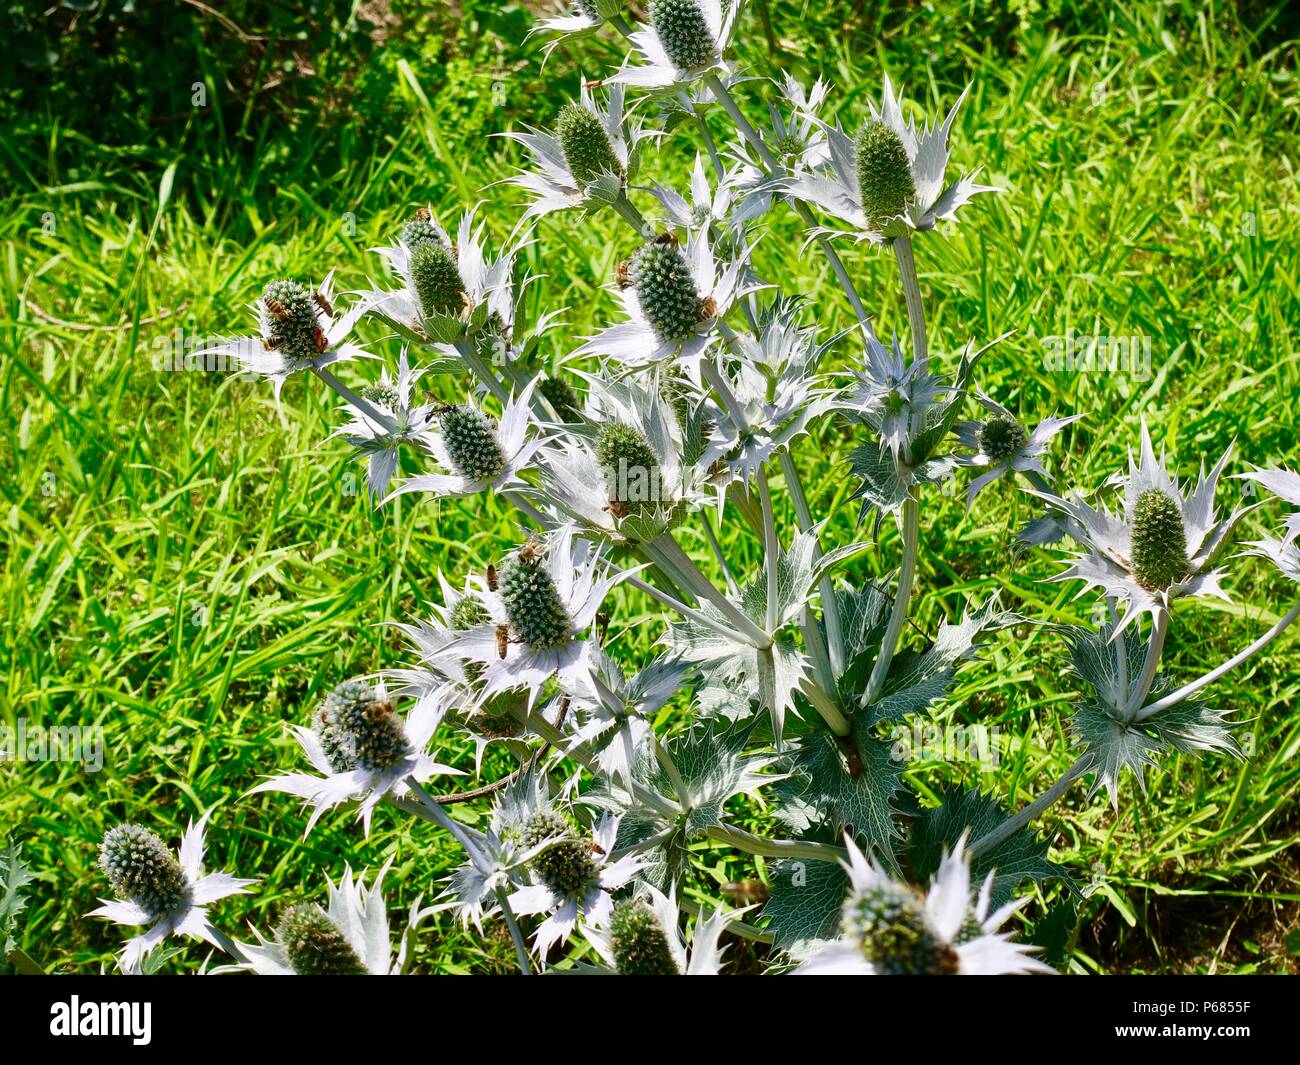 Eryngium giganteum, Sea holly, covered with pollinators, Northern France Stock Photo